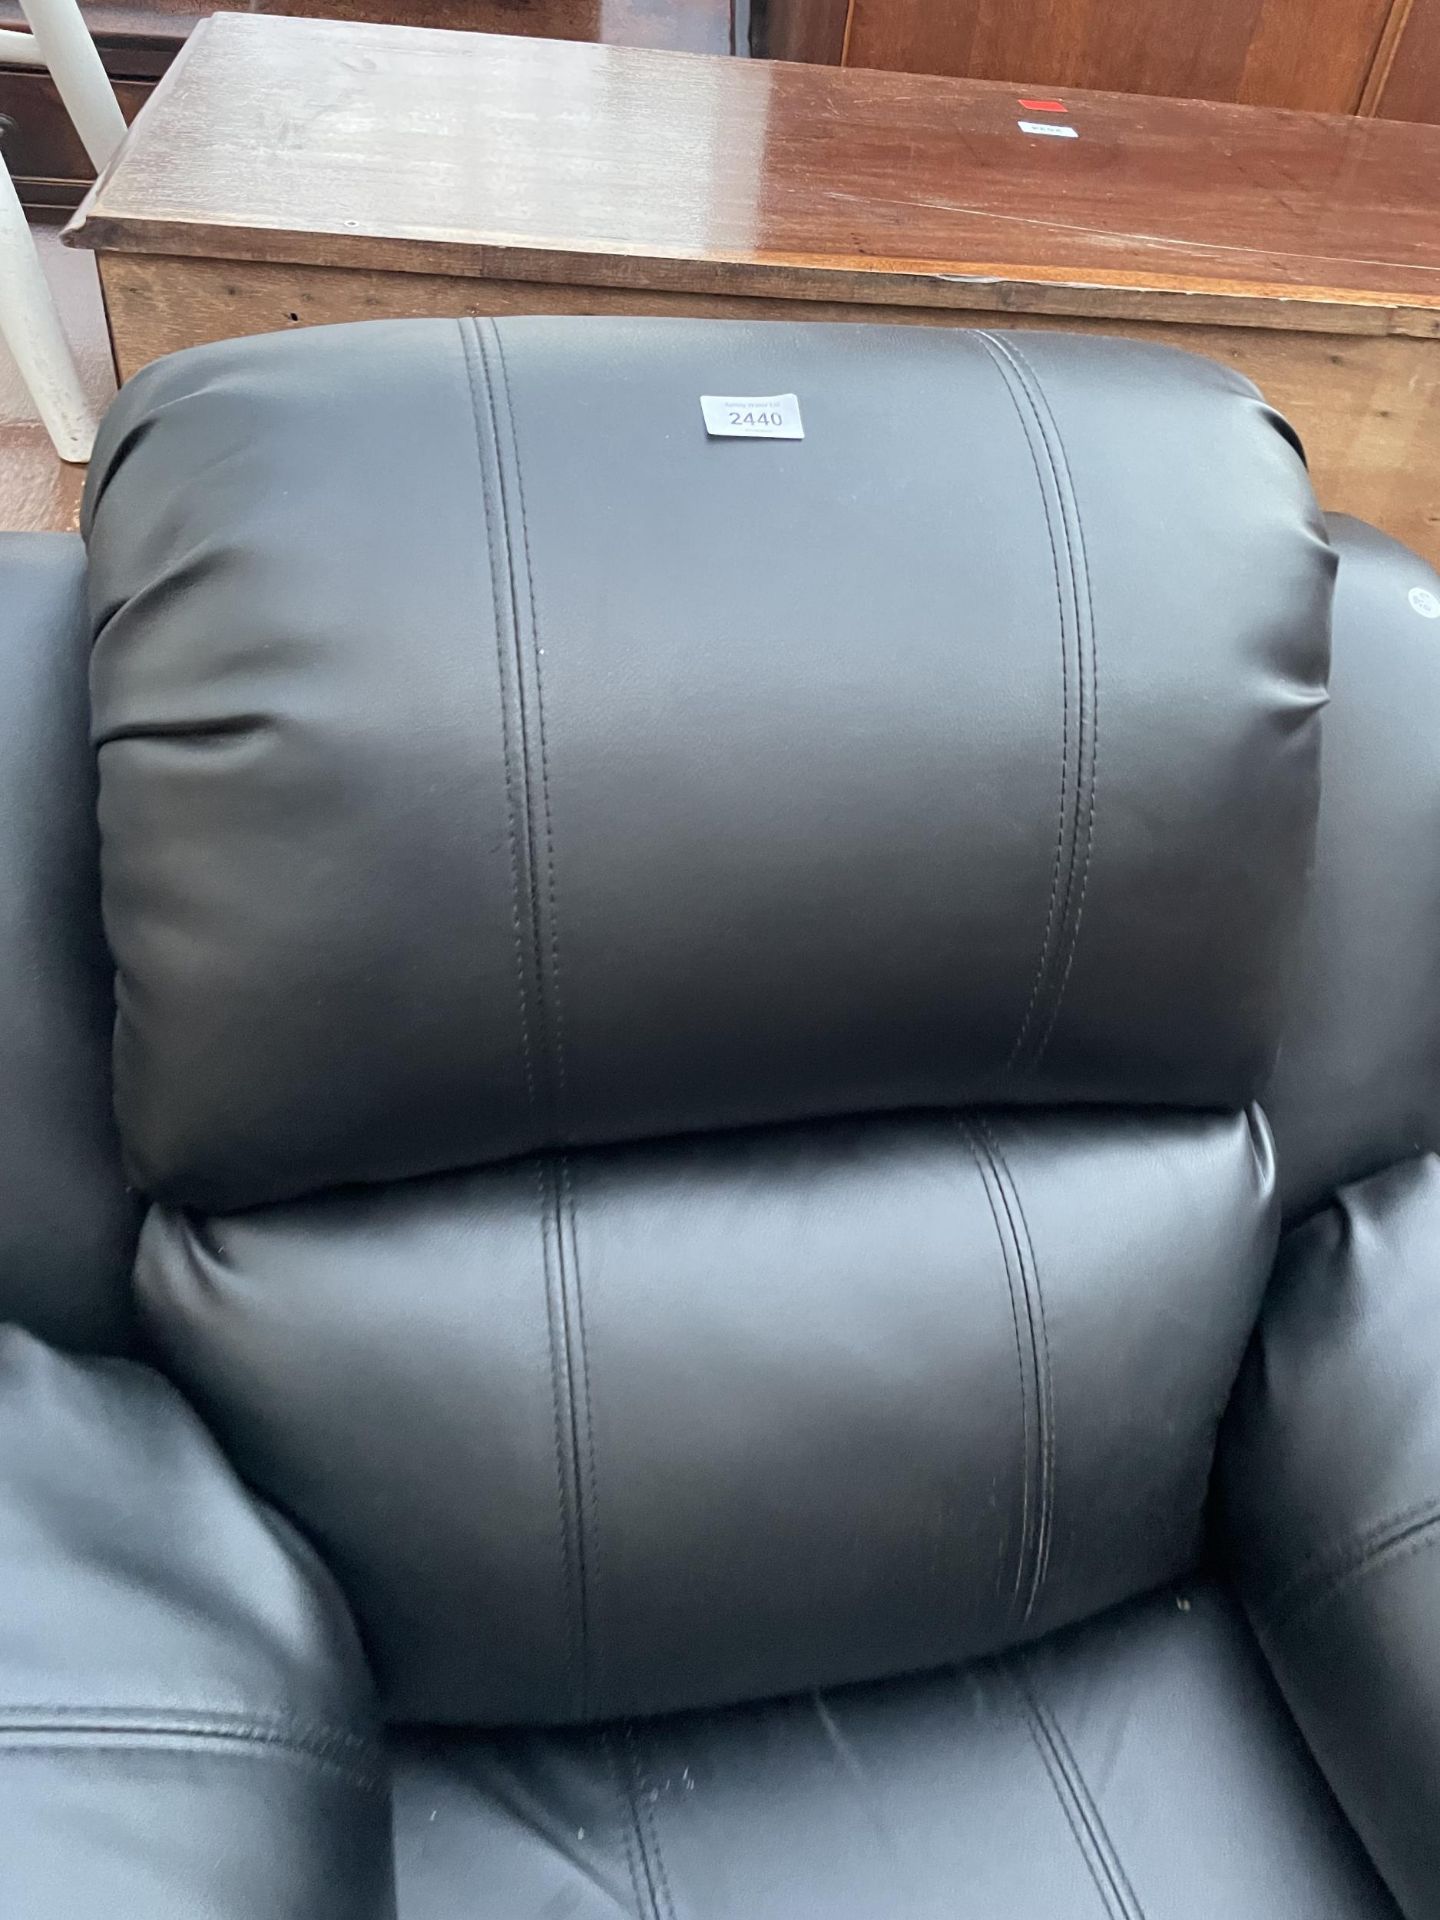 A MODERN DUNELM BLACK FAUX LEATHER RECLINER CHAIR - Image 2 of 3